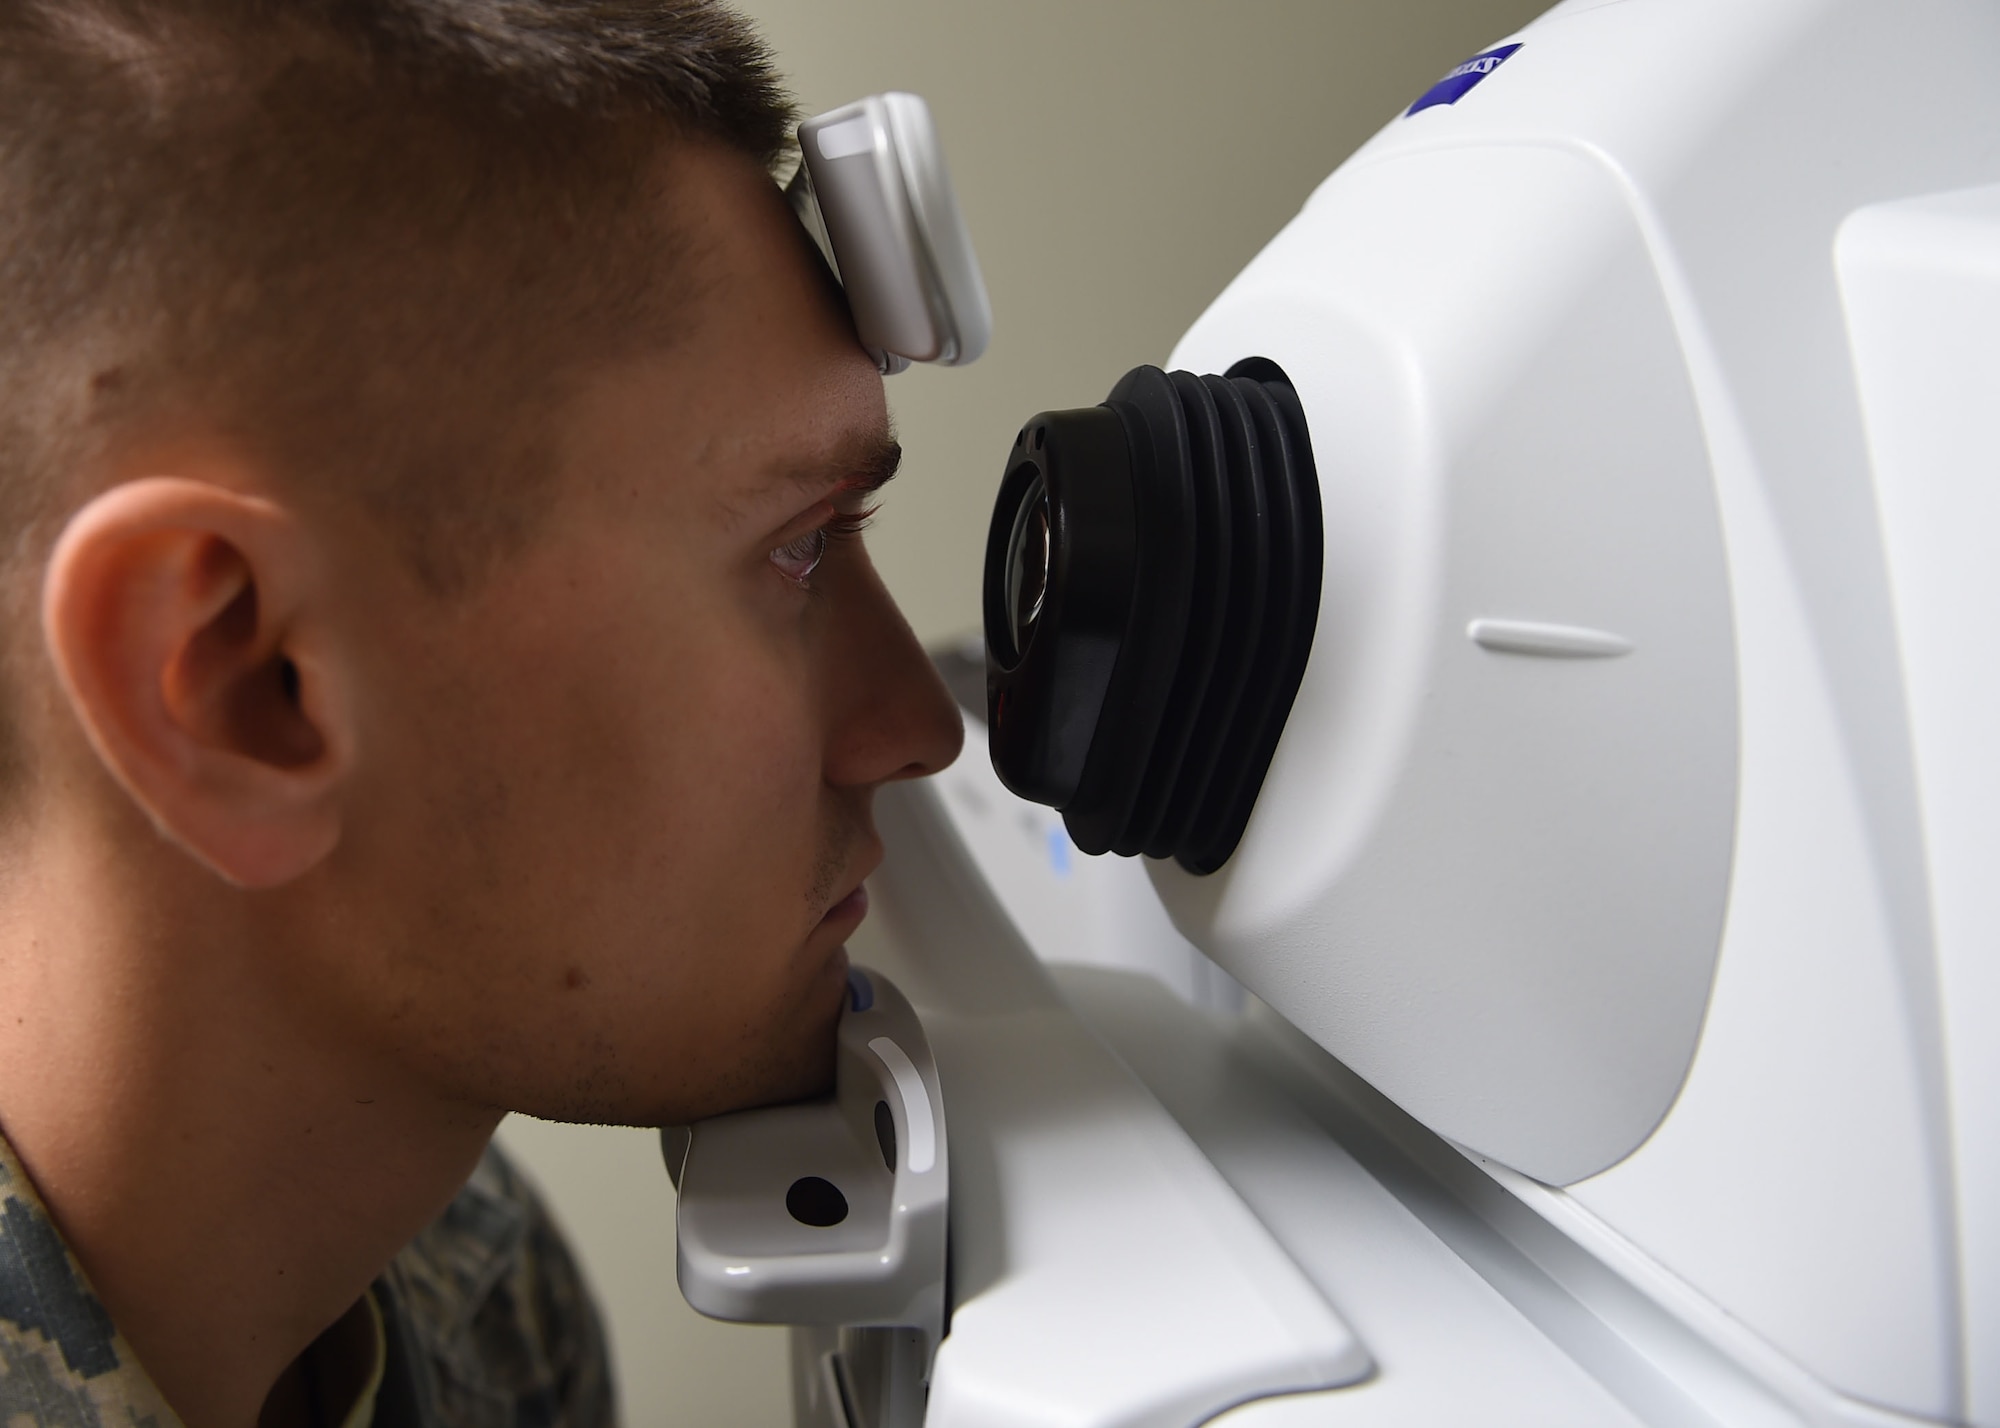 U.S. Air Force Senior Airman Stetson Montgomery, 97th Civil Engineer Squadron heating, ventilation, air conditioning and refrigeration technician, undergoes an eye exam at the 97th Medical Group, Oct. 1, 2015 at Altus Air Force Base, Okla. The clinic screens for any type of condition within the eye, provides prescriptions and do repairs and fittings for glasses. If diagnosed, the clinic can treat some conditions on site. (U.S. Air Force photo by Airman 1st Class Megan E. Acs/Released)